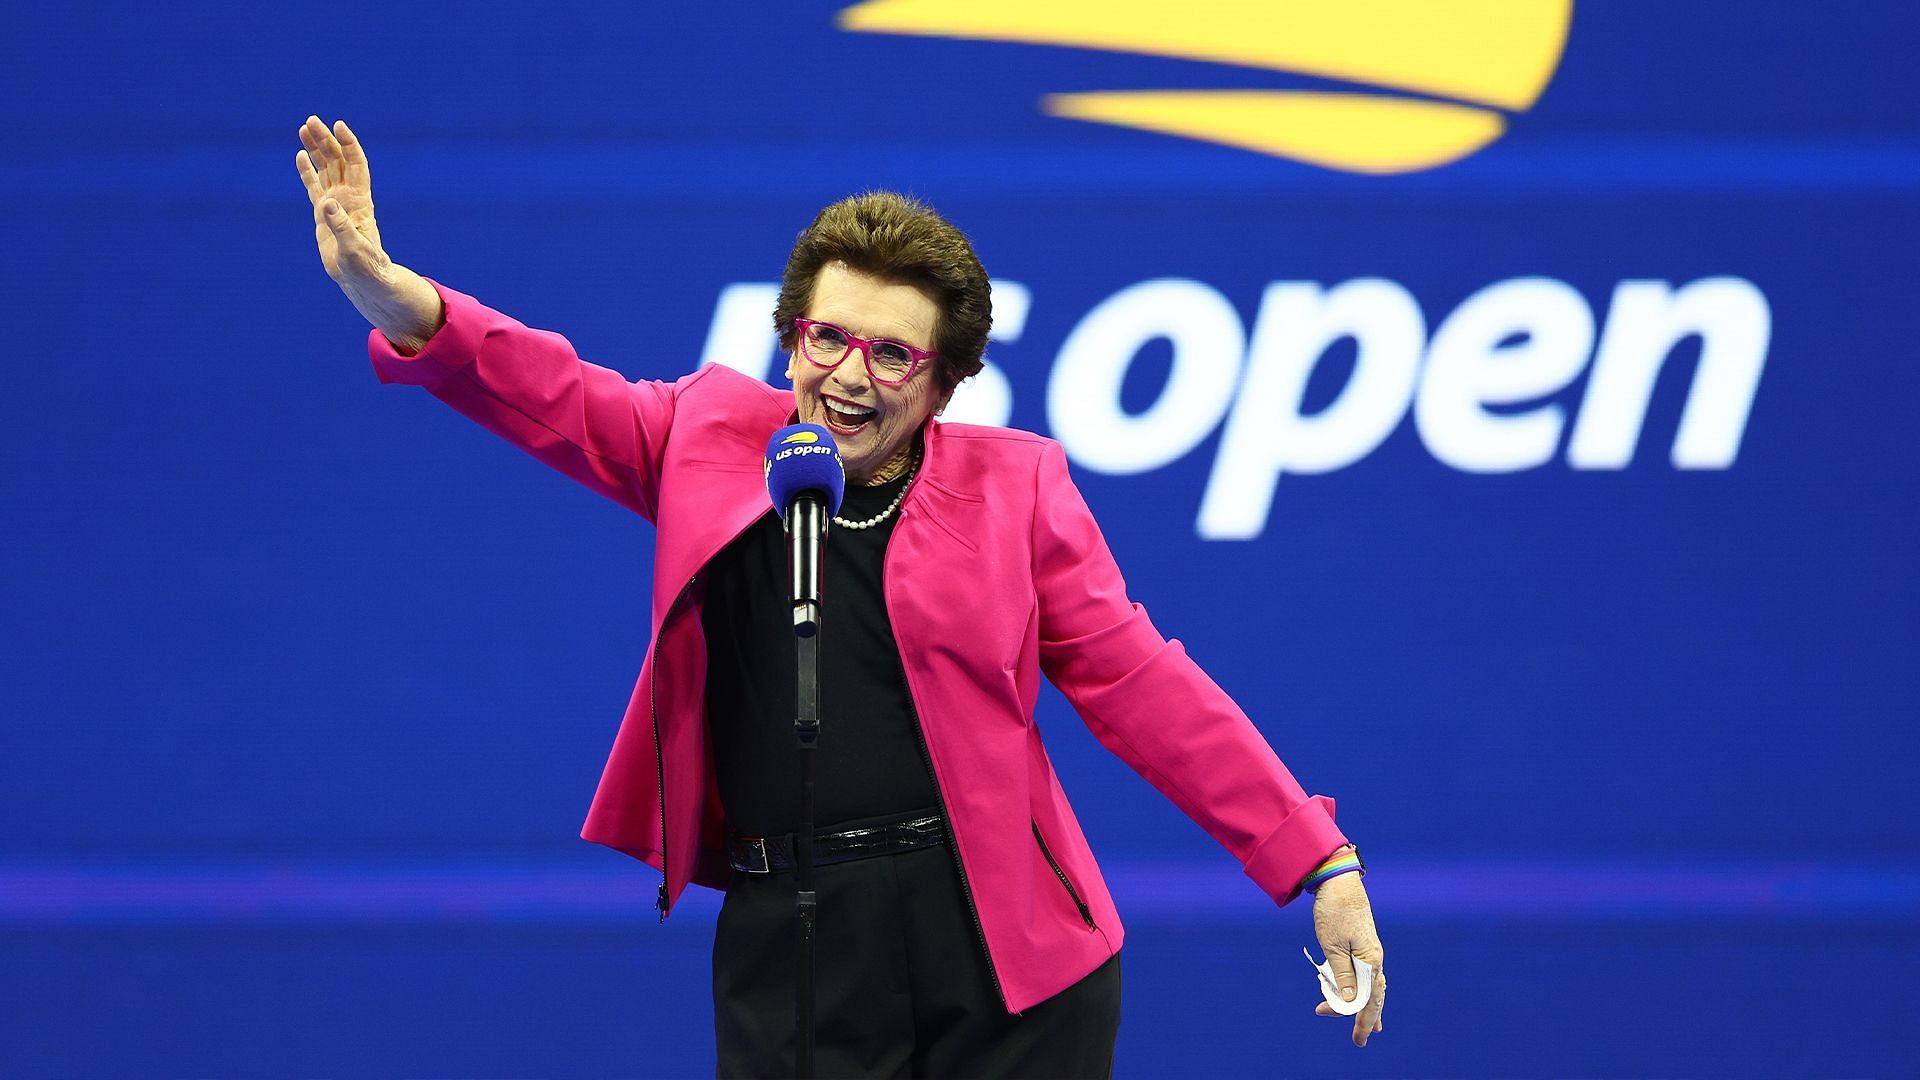 Billie Jean King lends support to the FIFA World Cup Hosts